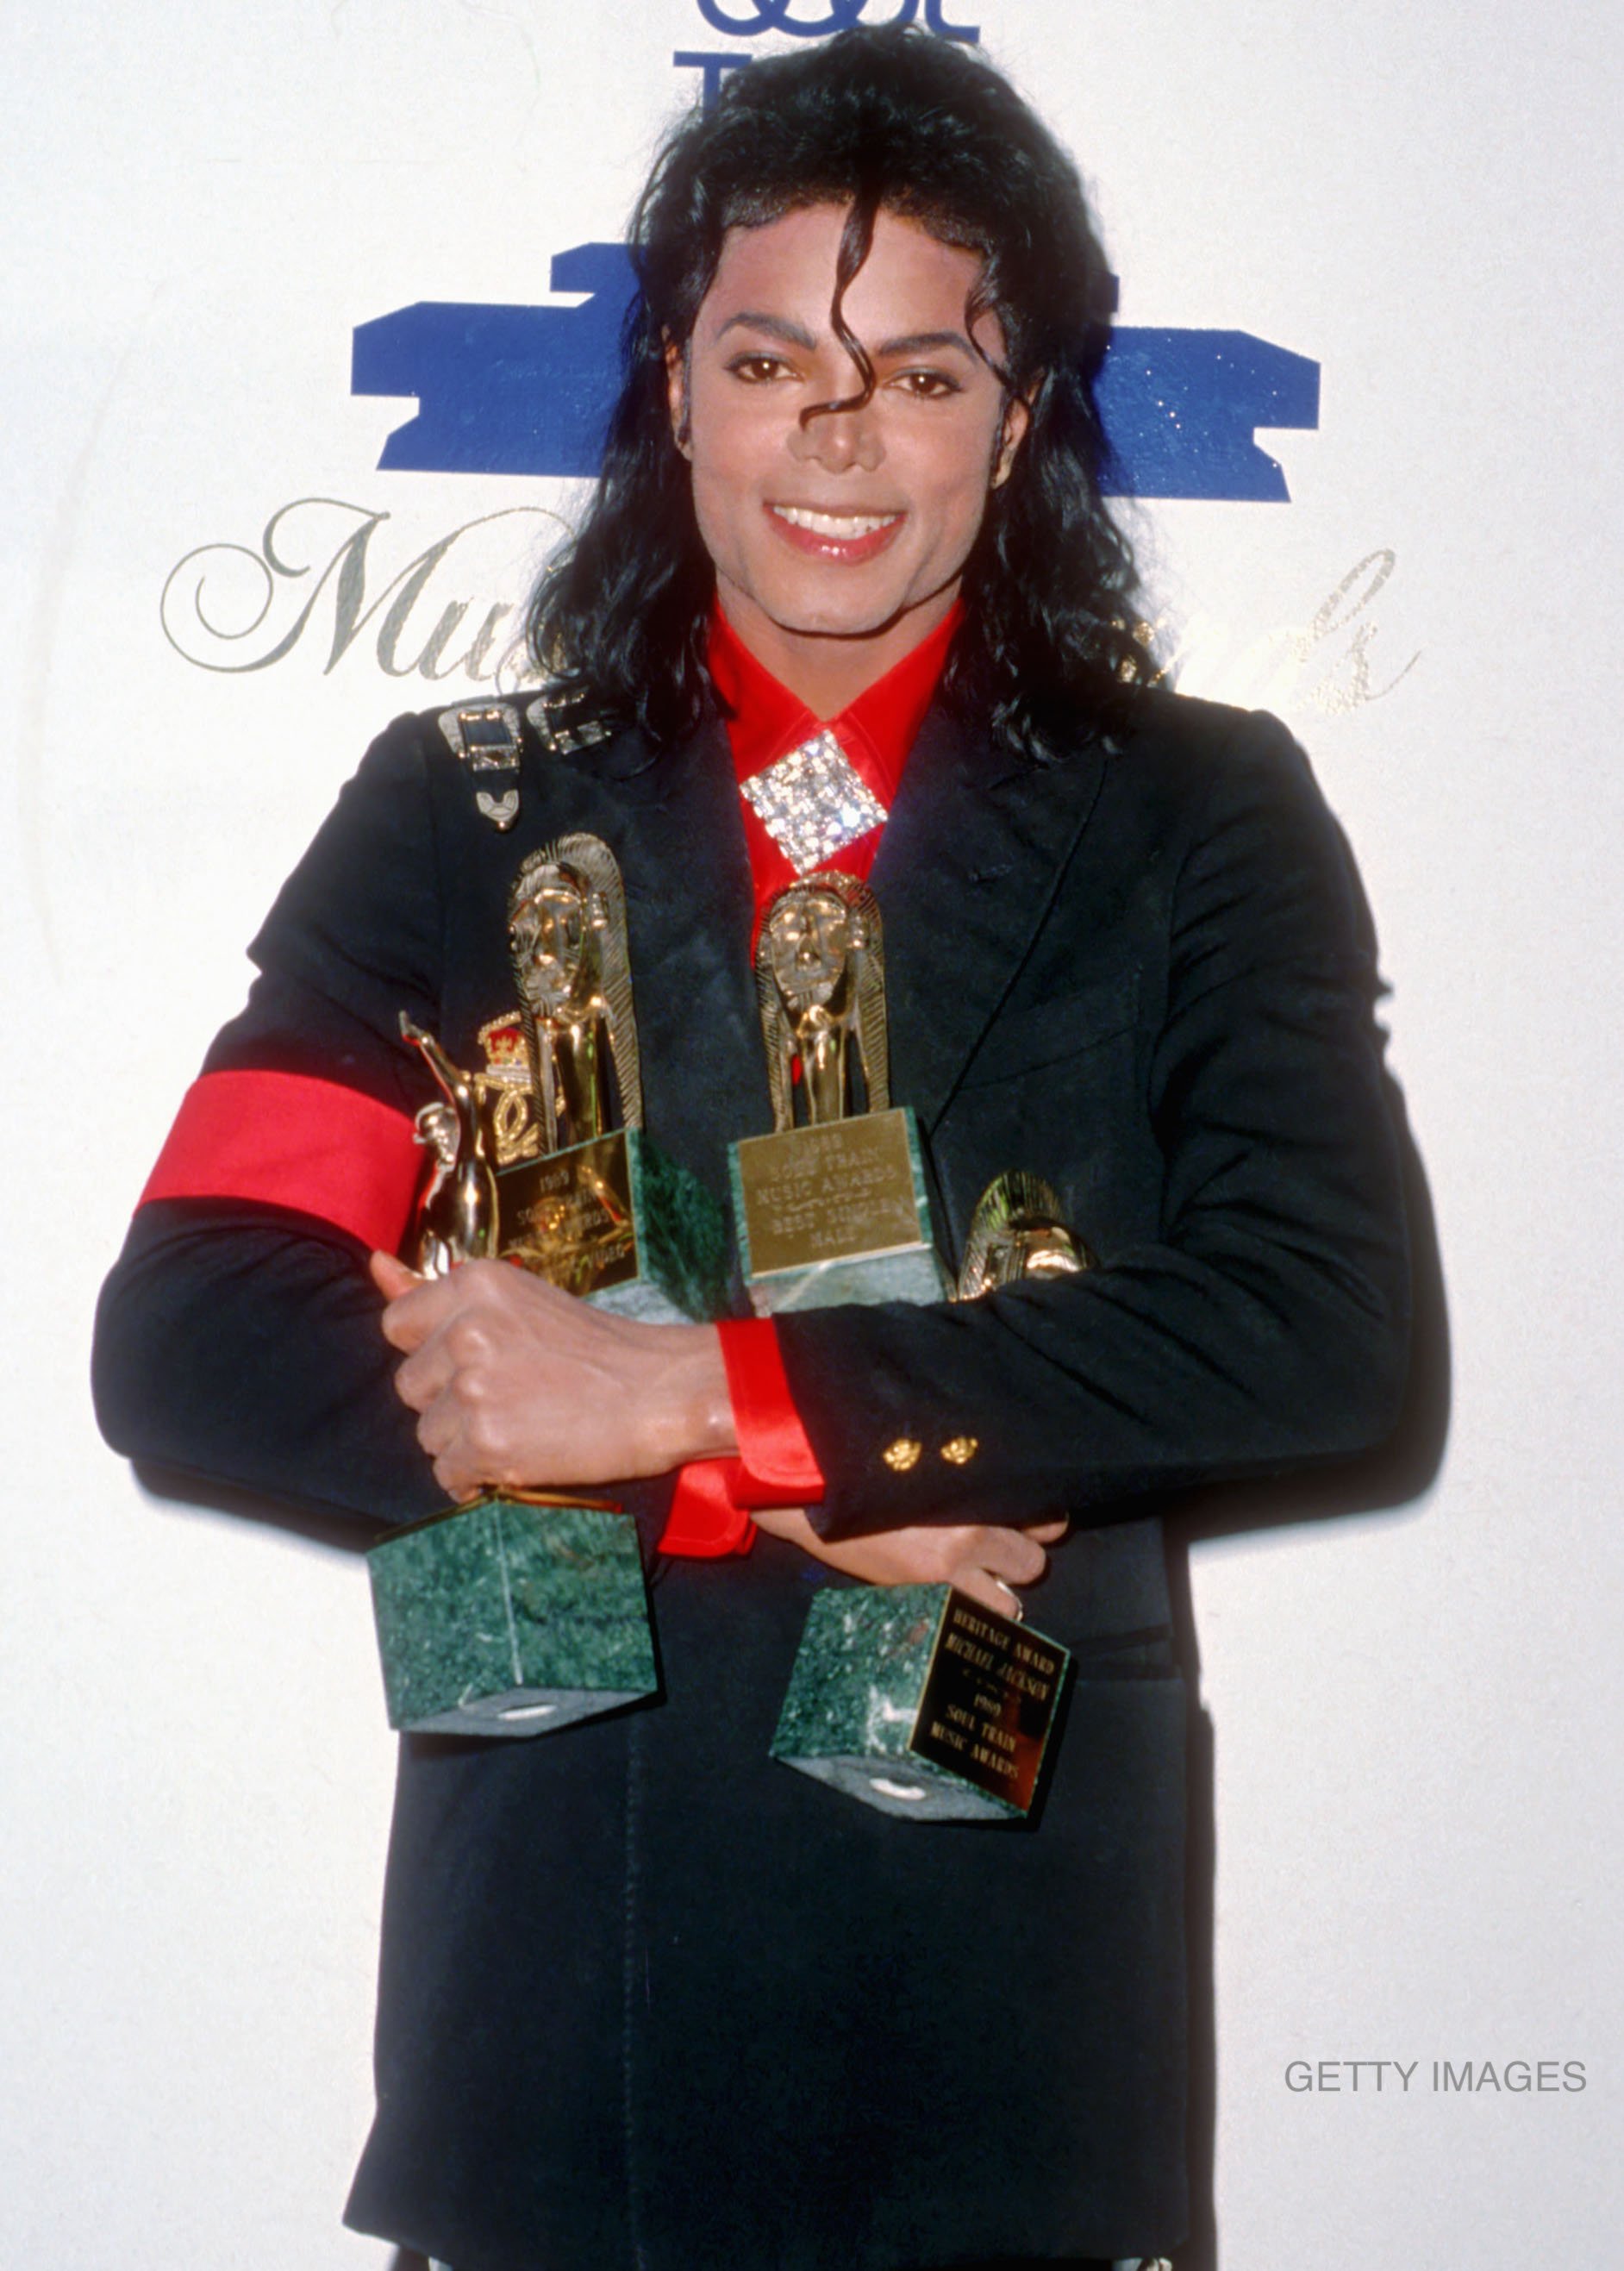 Michael Jackson at 3rd Annual Soul Train Awards at Shrine Auditorium in Los Angeles, CA, April 12, 1989